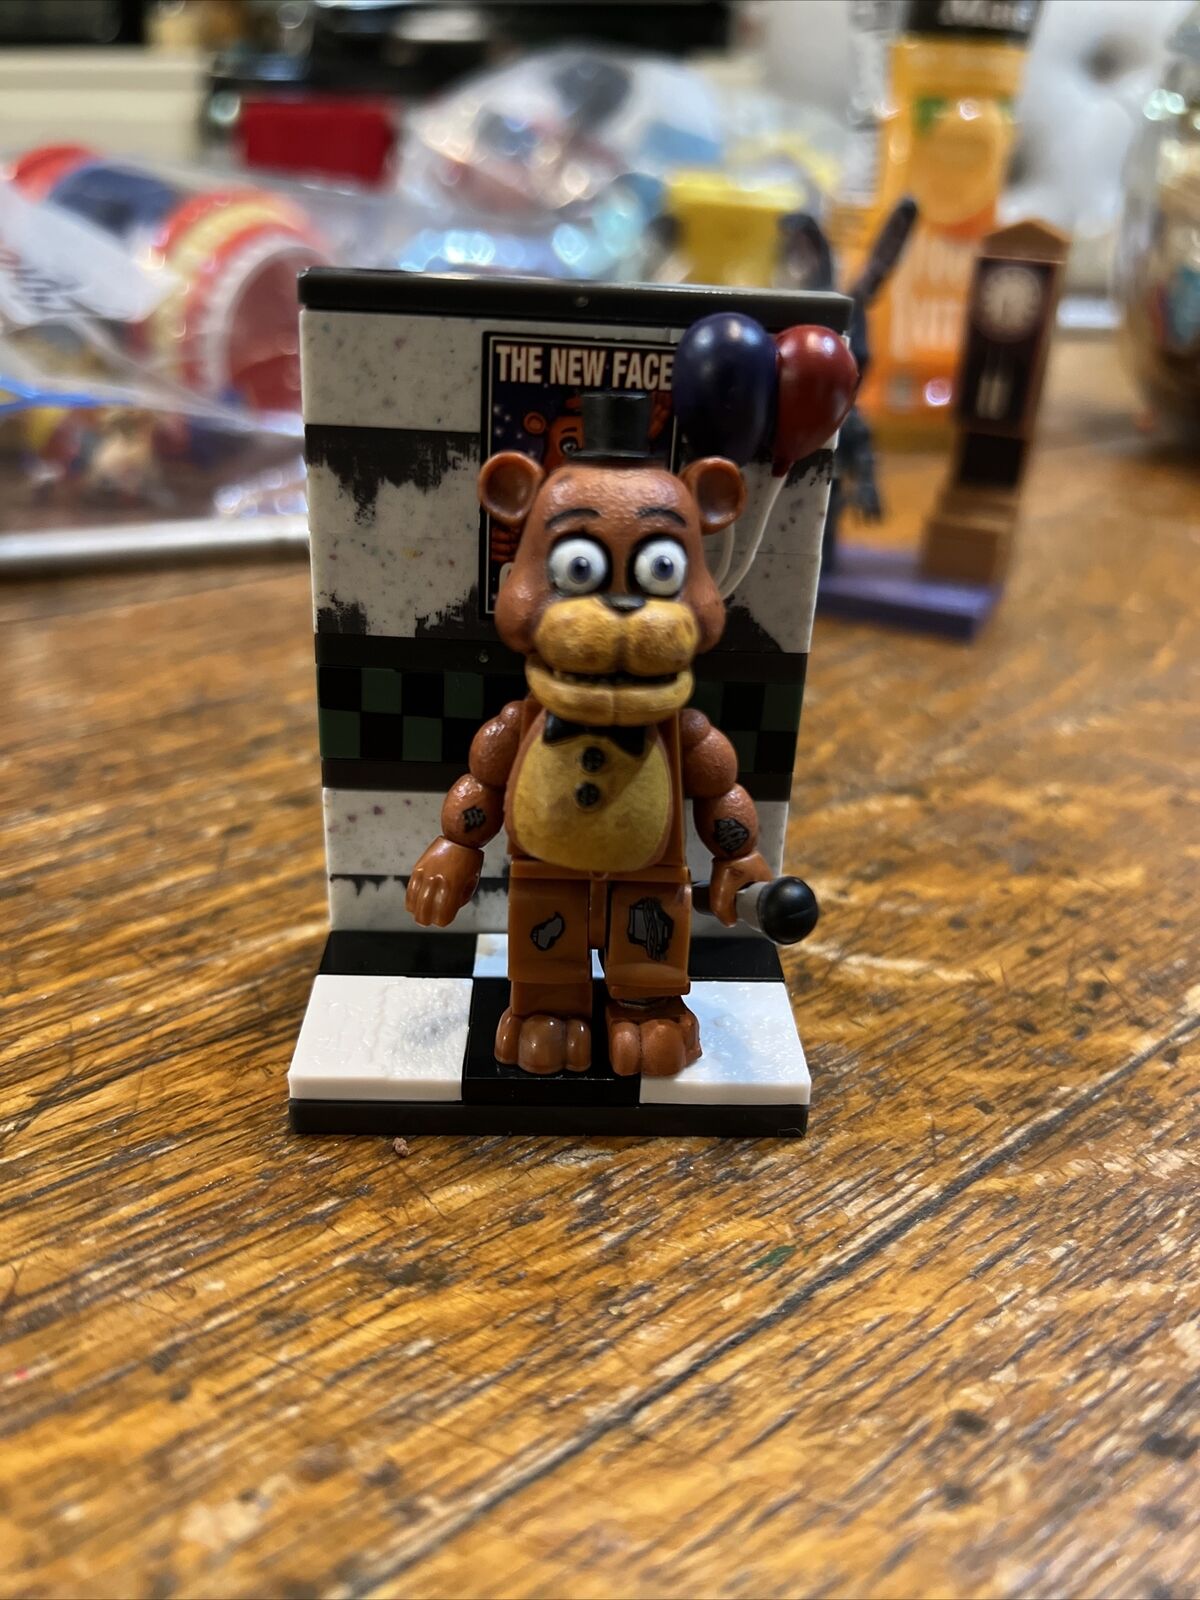 McFarlane Toys Five Nights at Freddy's Withered Freddy W/ Party